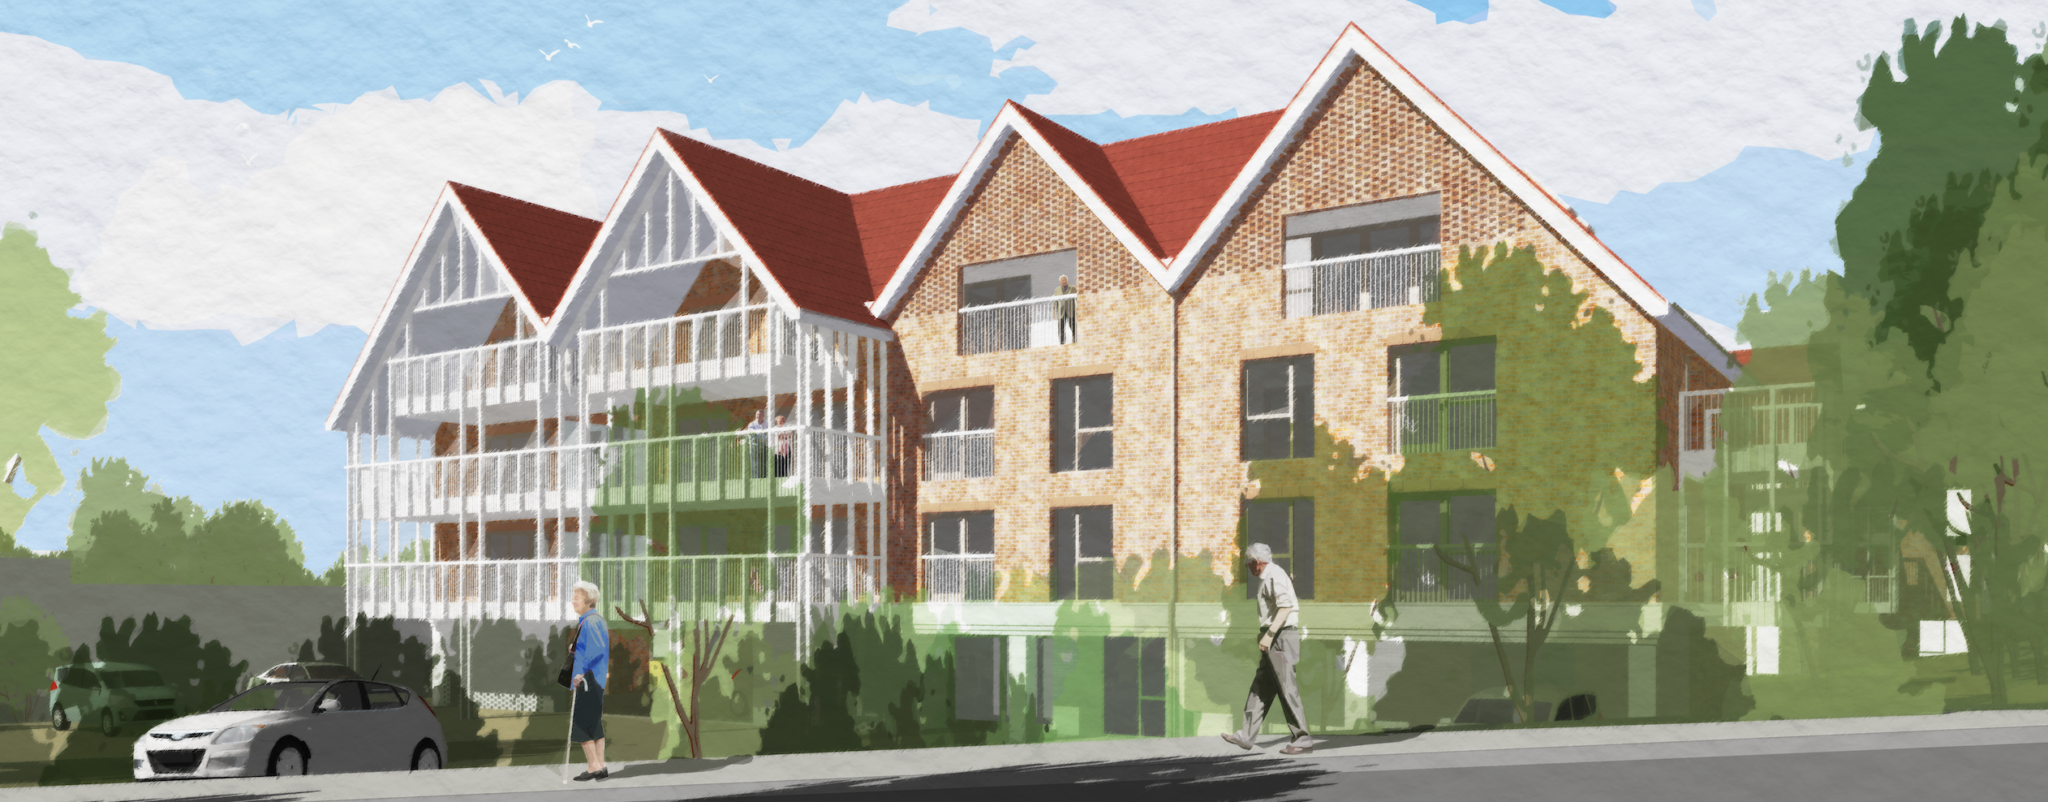 Another retirement living scheme is submitted to planning on behalf of Lifestory.